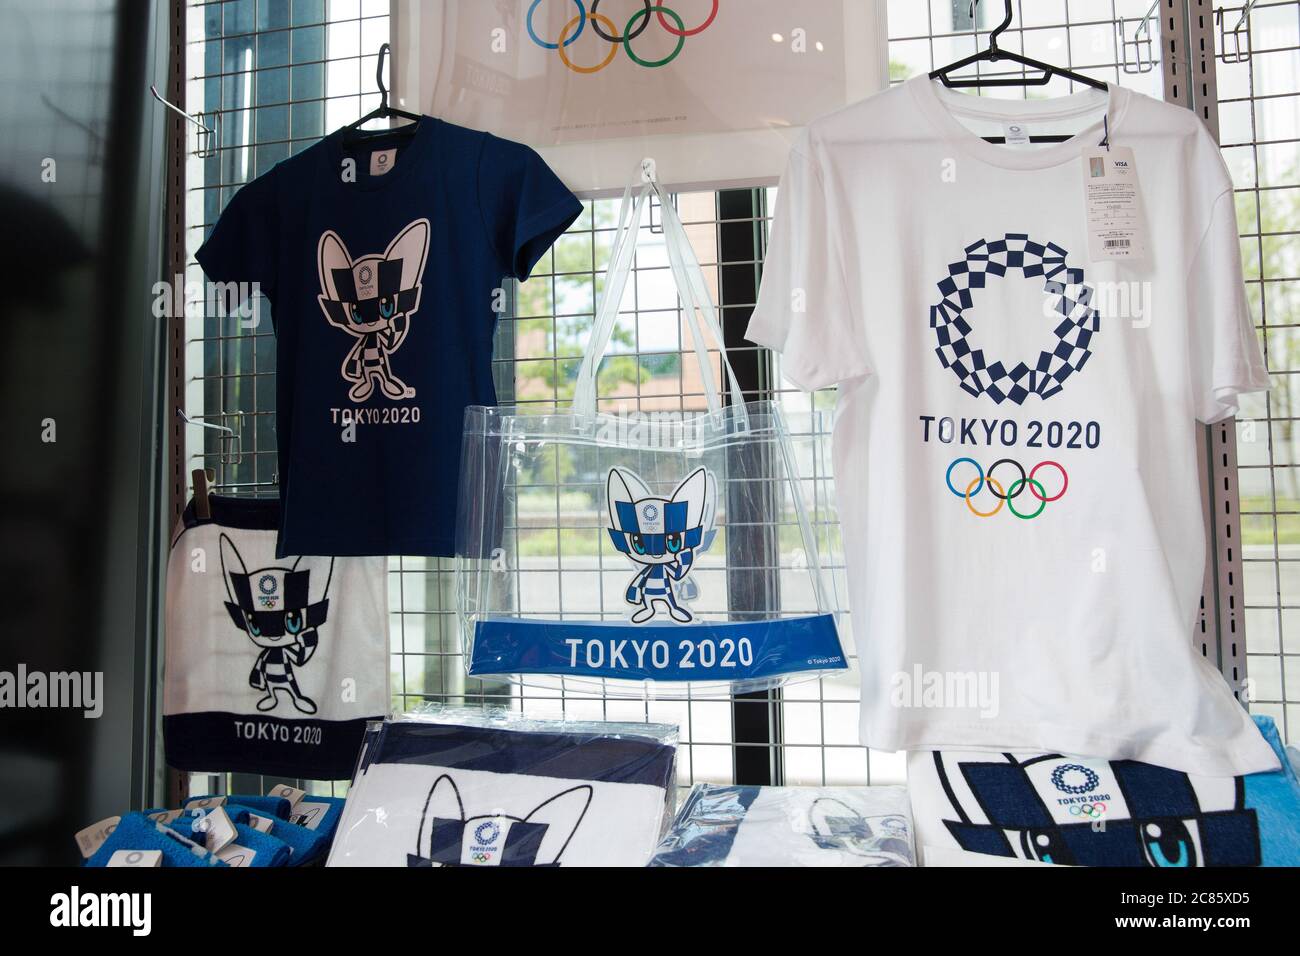 Olympic gear, including USA jerseys, available ahead of Tokyo